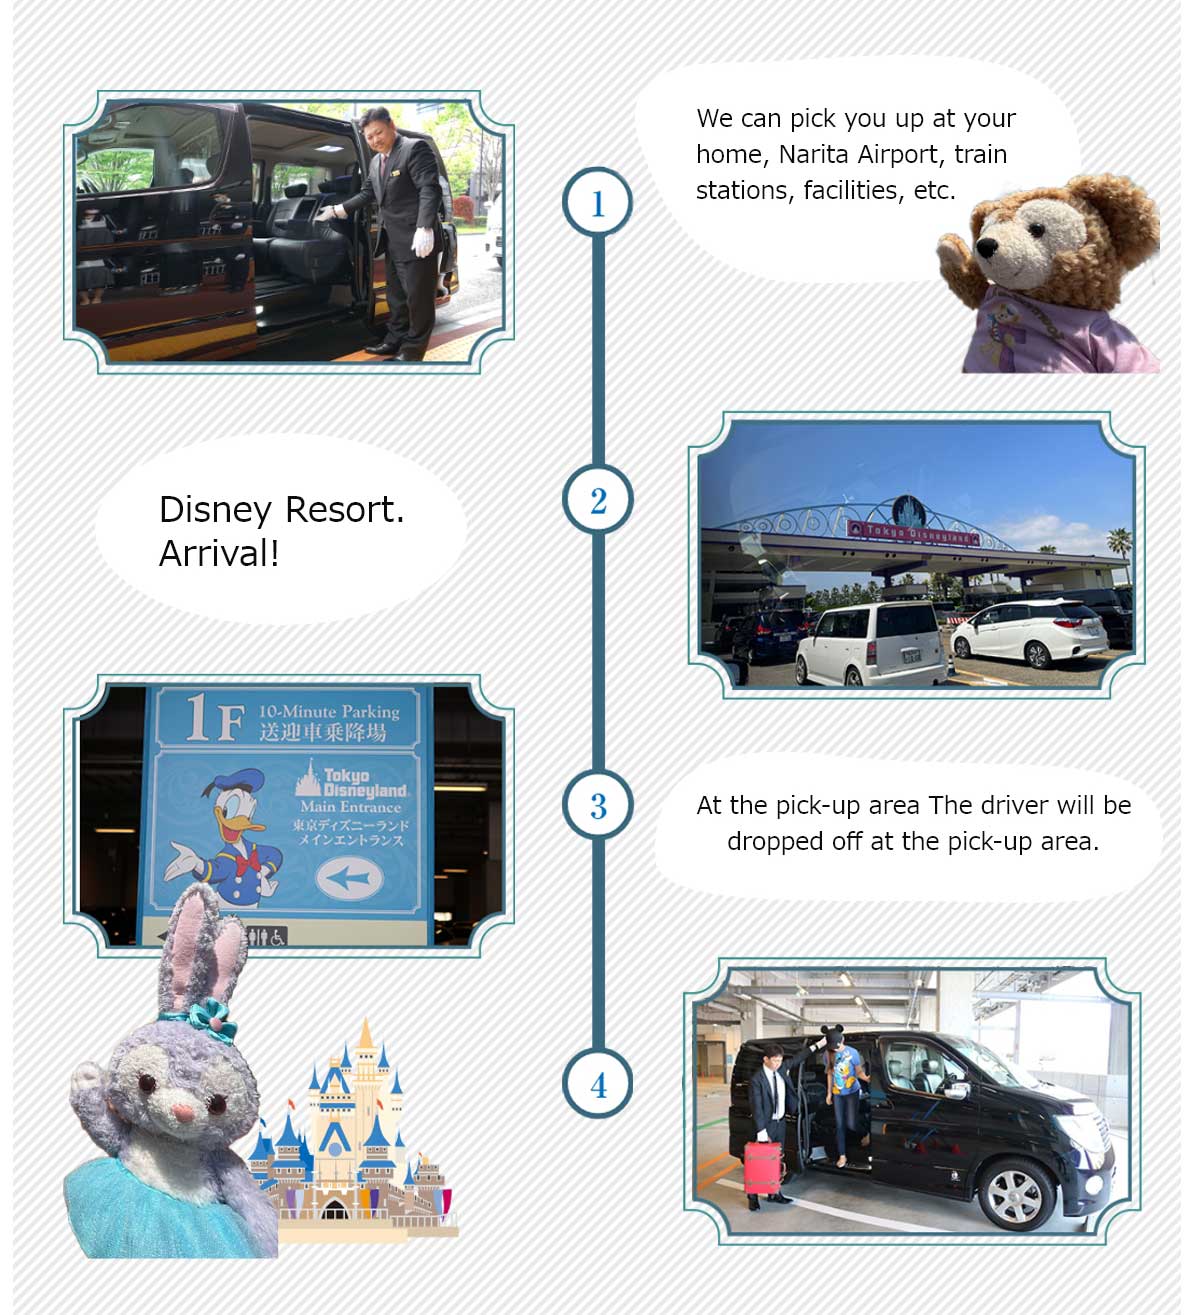 Take a Taxi to the Disney Resort